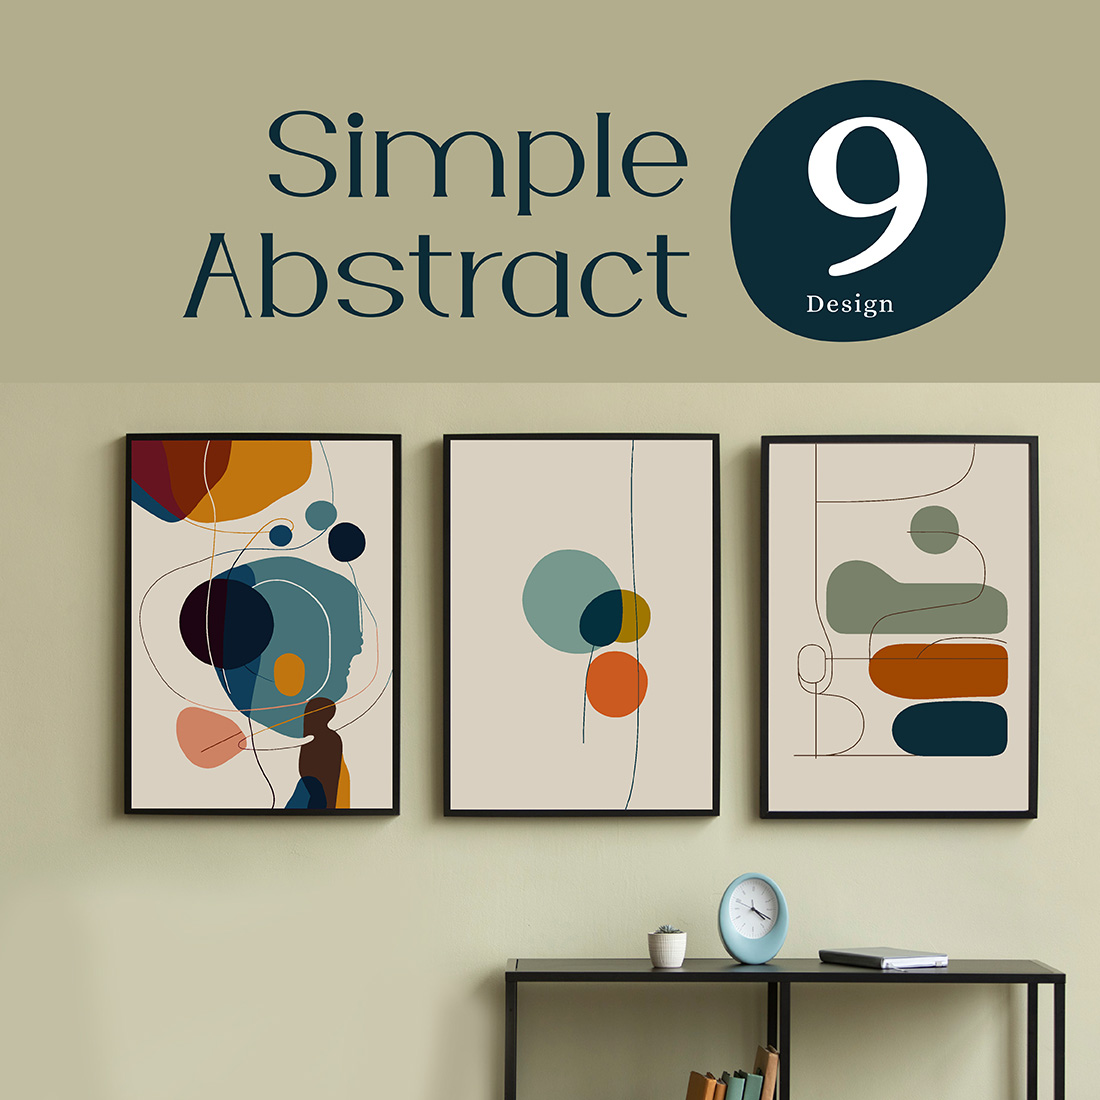 9 Minimalist Abstracts Art Print cover image.